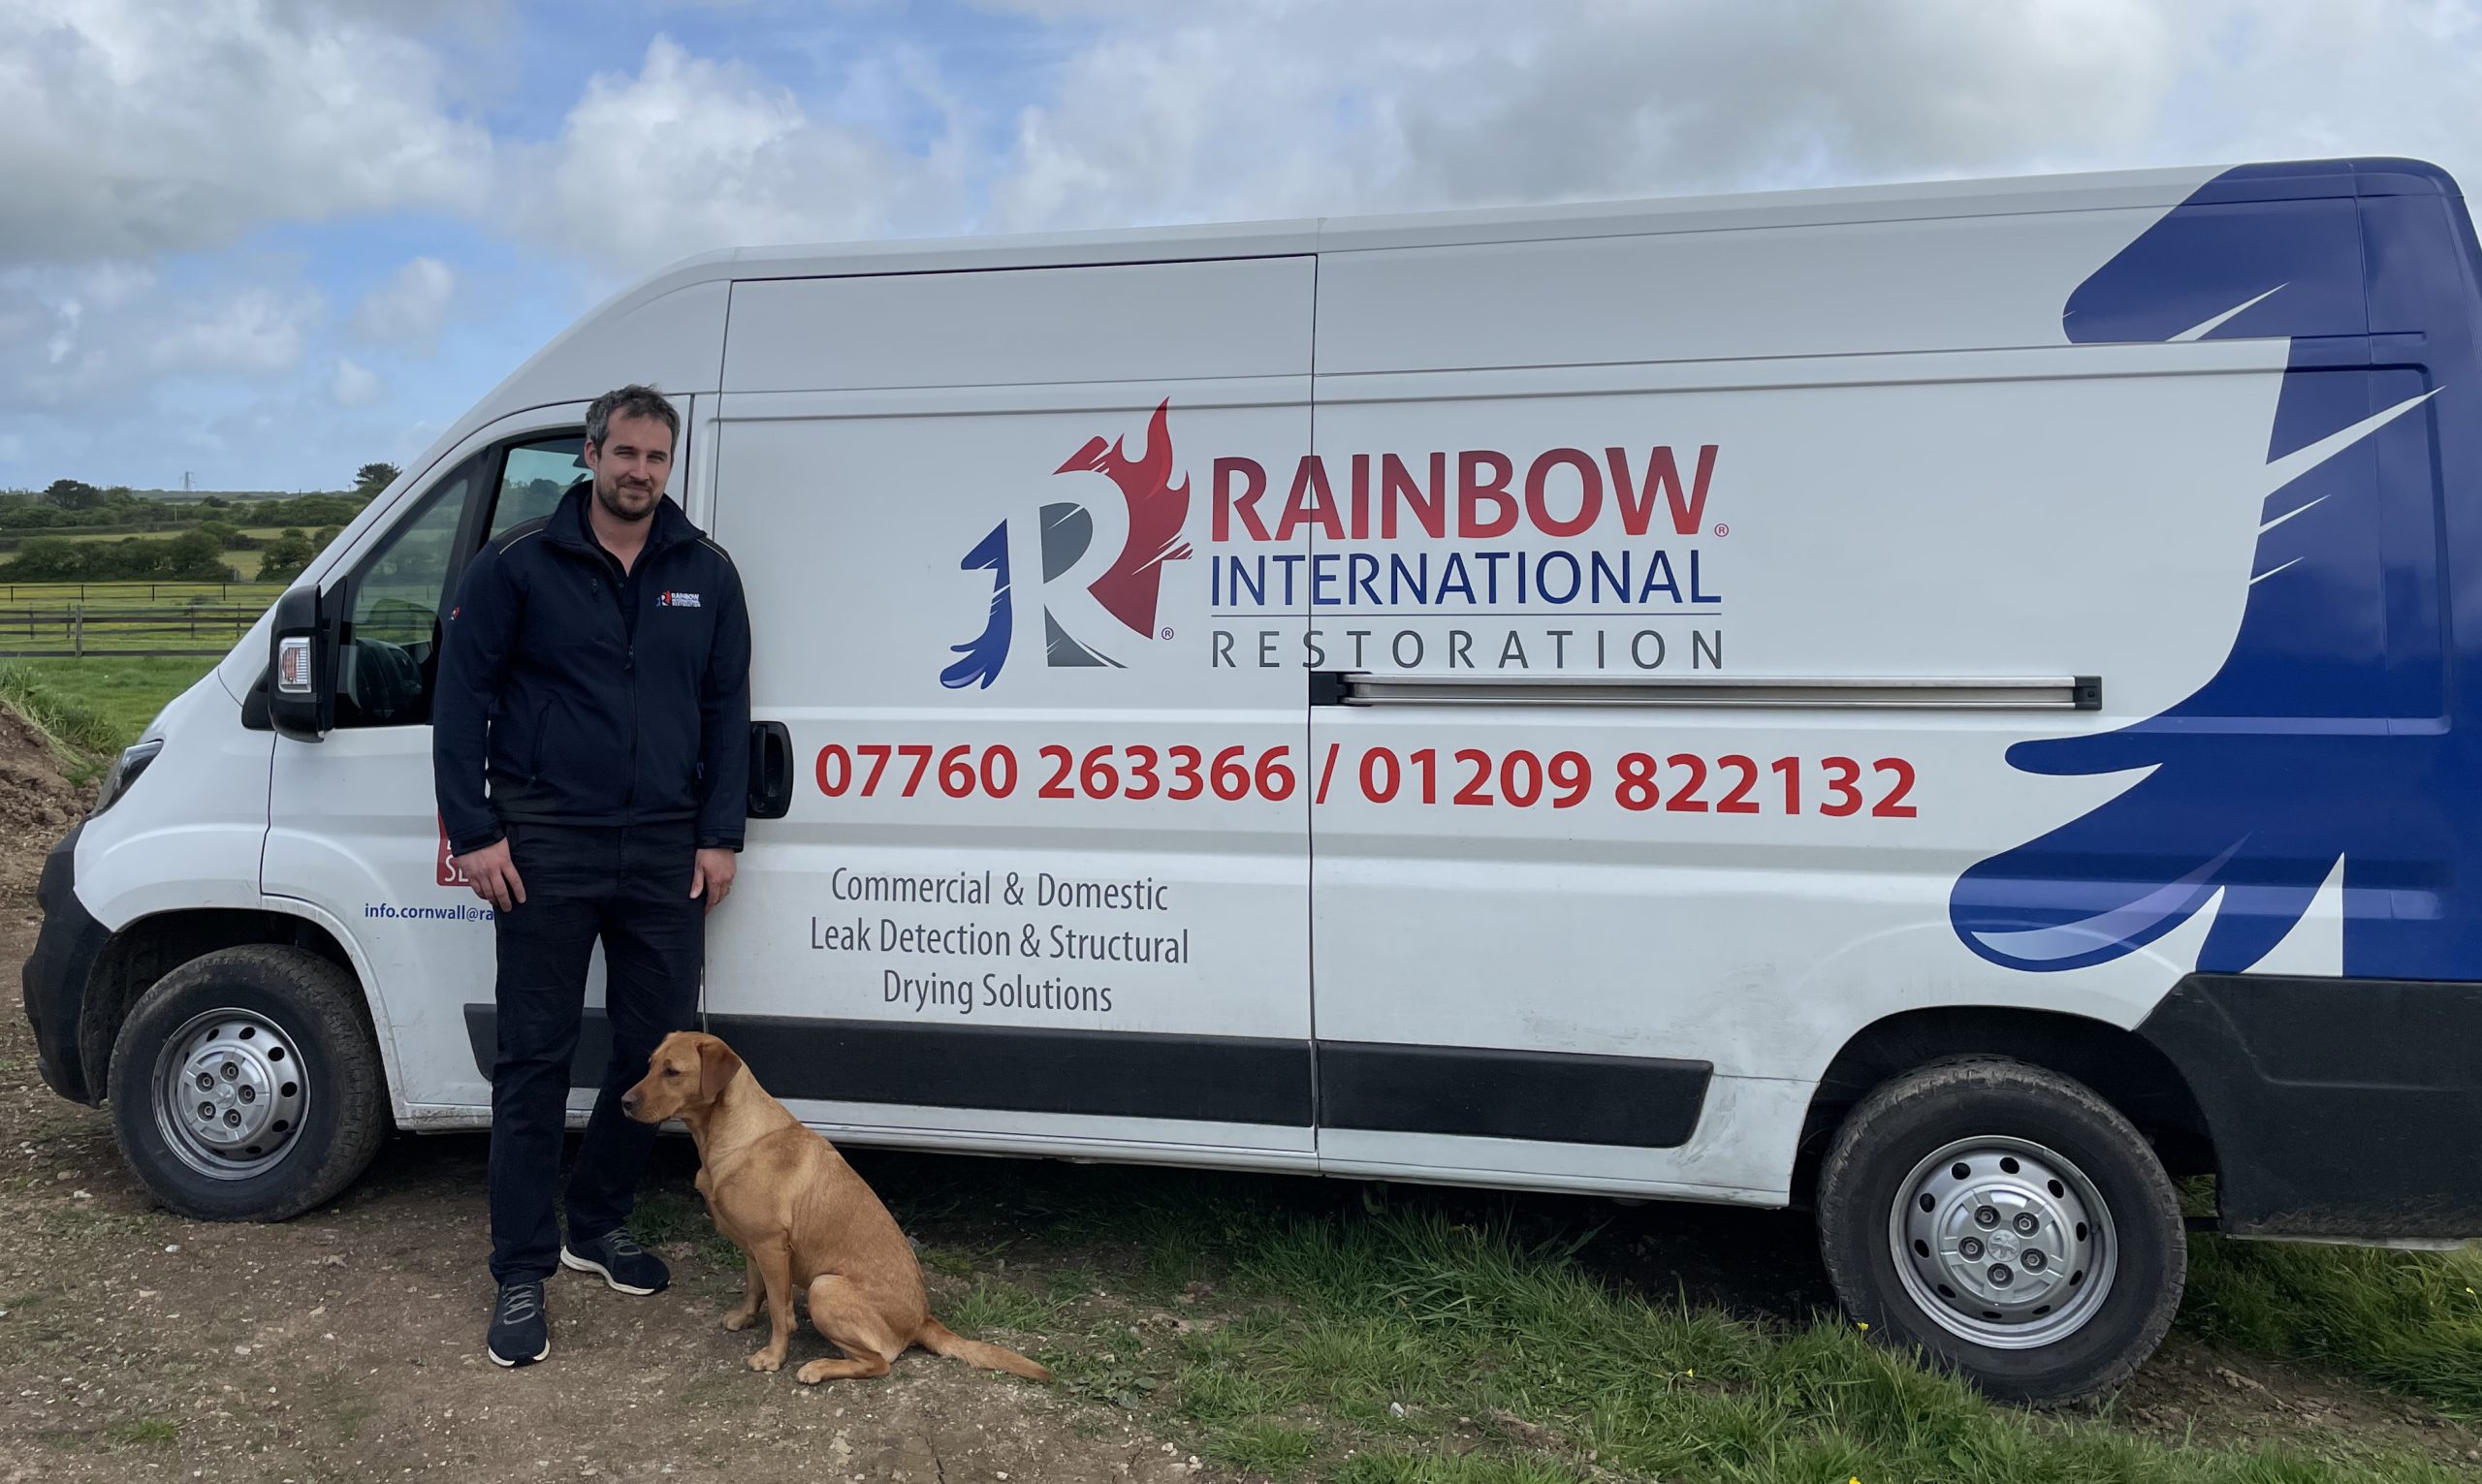 Rainbow International Cornwall is now open for business